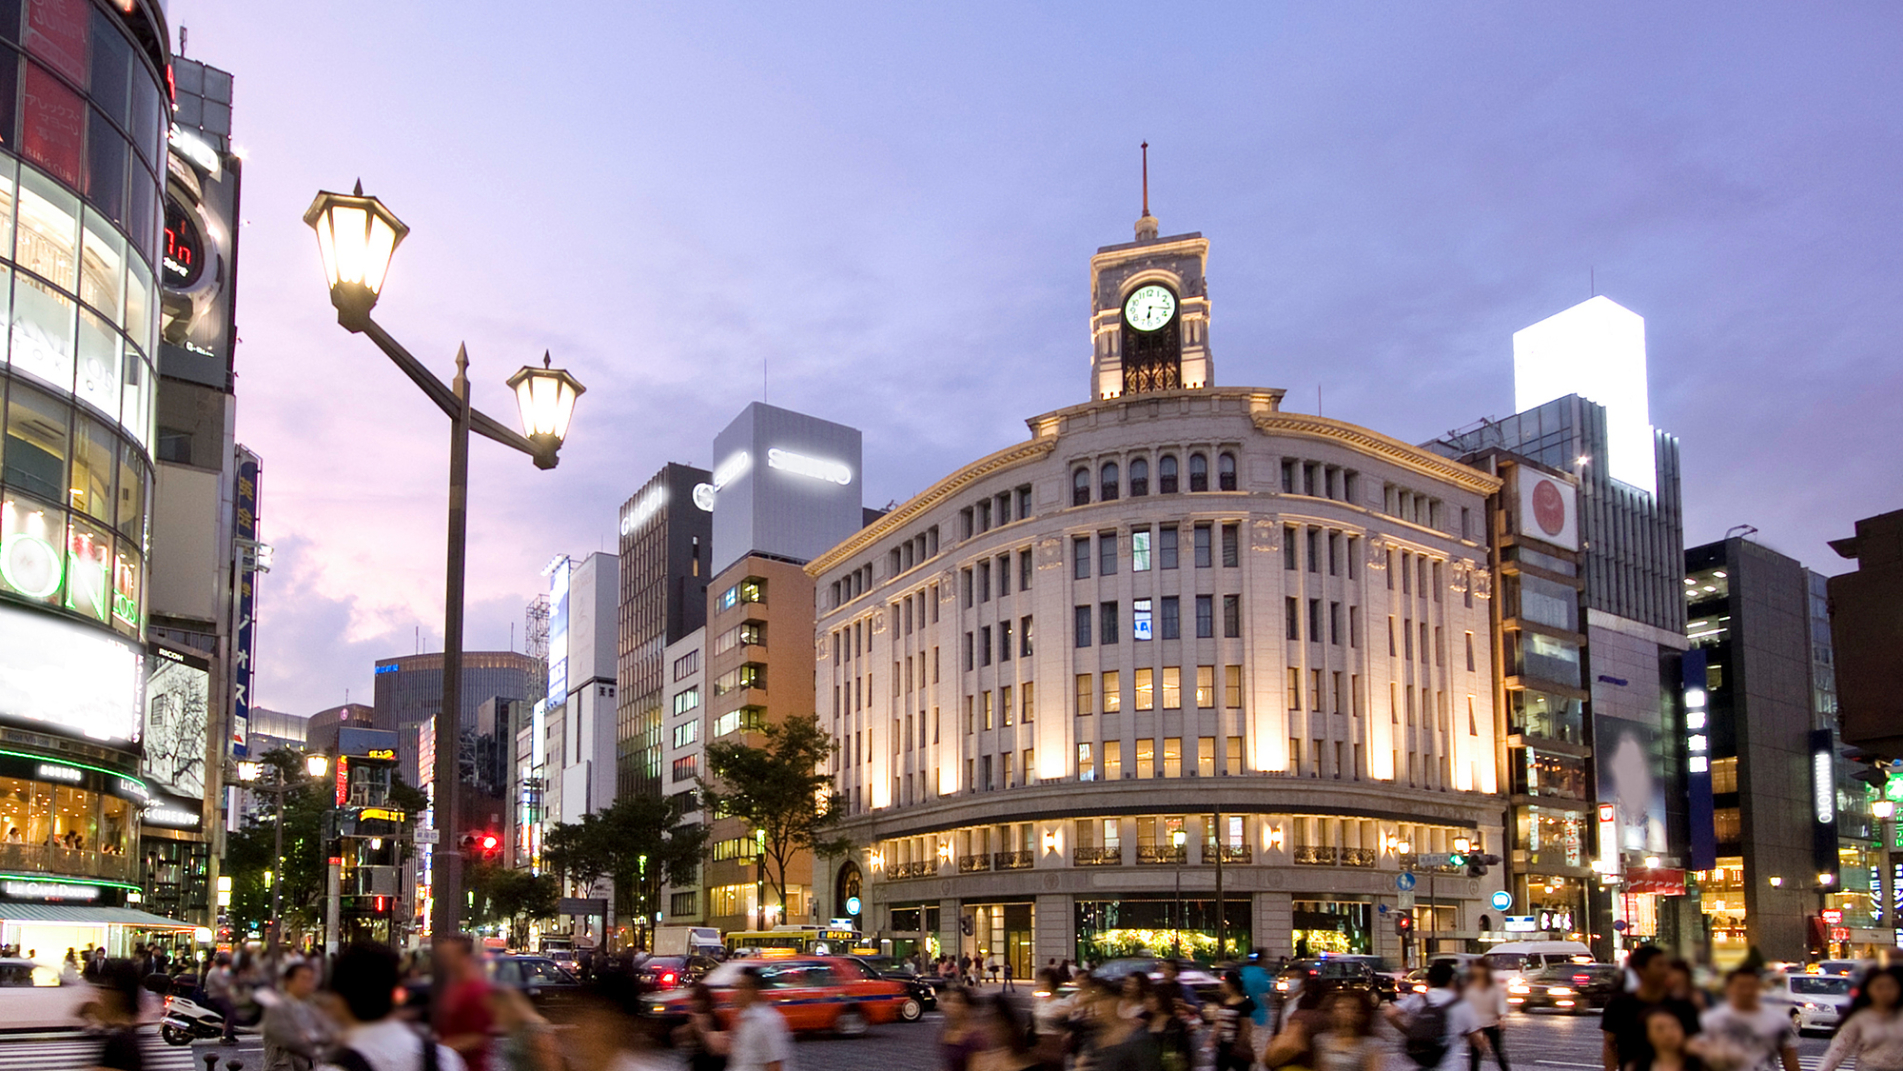 Evening view in front of Ginza Mitsukoshi